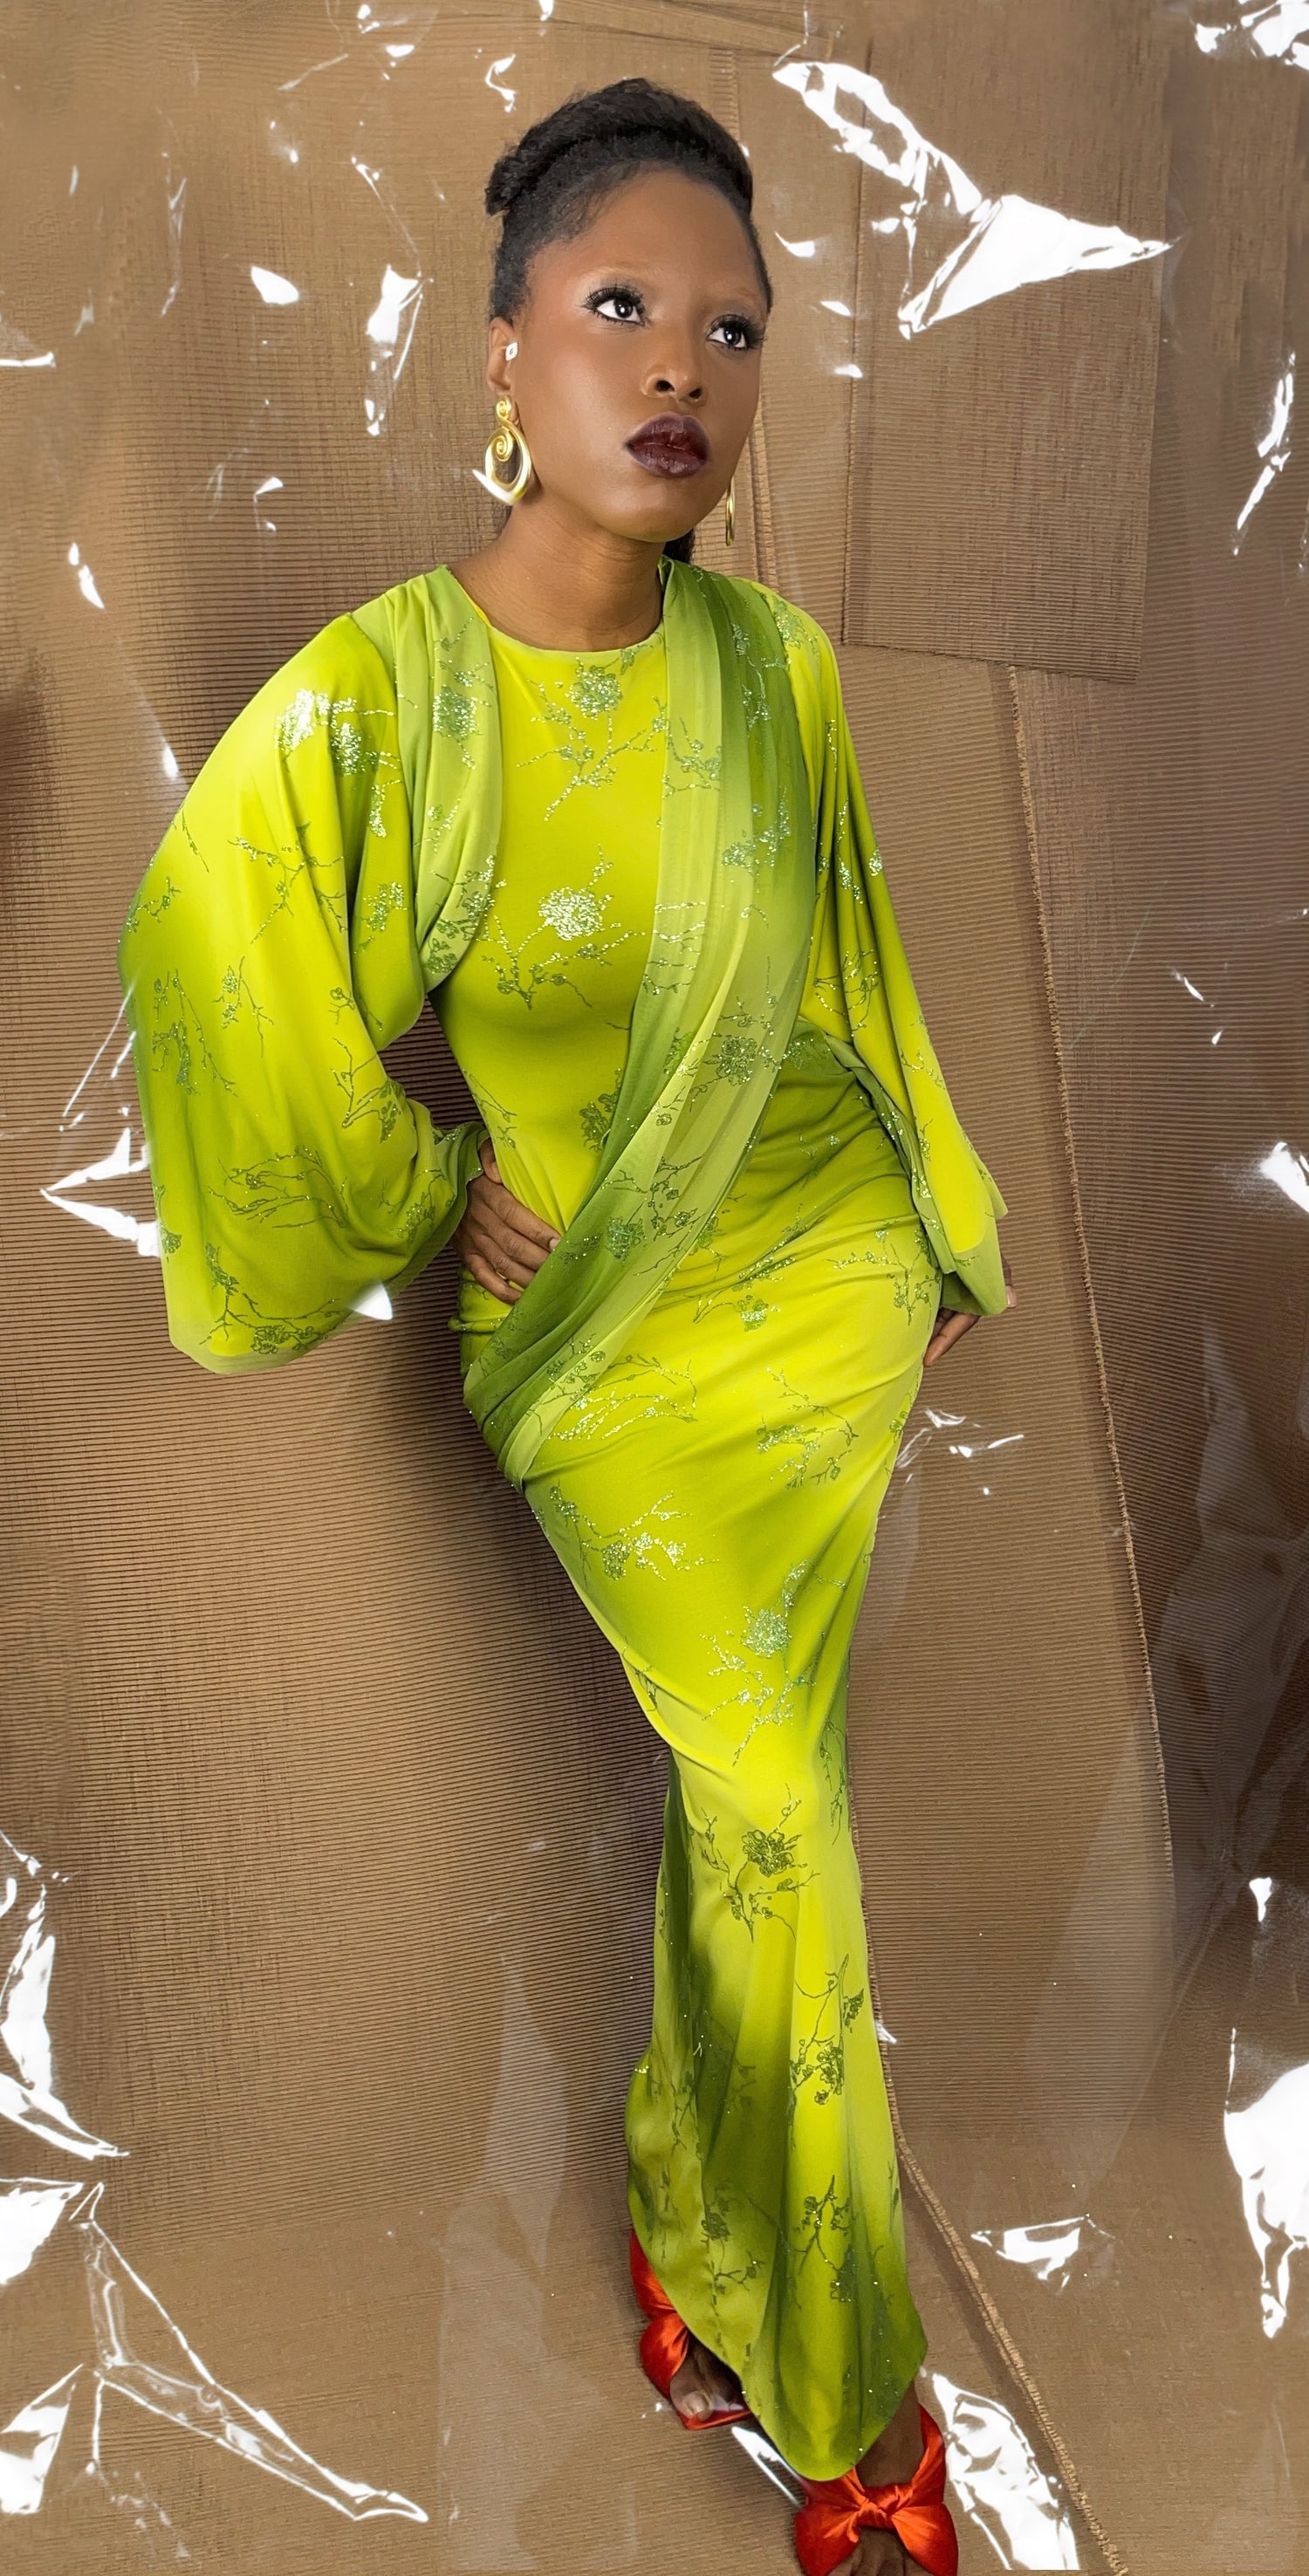 Front view of our modest flowy drape dress. The dress is made in a ombre green and yellow fabric with images of flowers in matching glitter. The dress features a sash like detail that wraps across the body from the front to the back. The sleeves features a asymmetric hem and bellow out to create more gathers. The dress is maxi length with a small slit on one side.